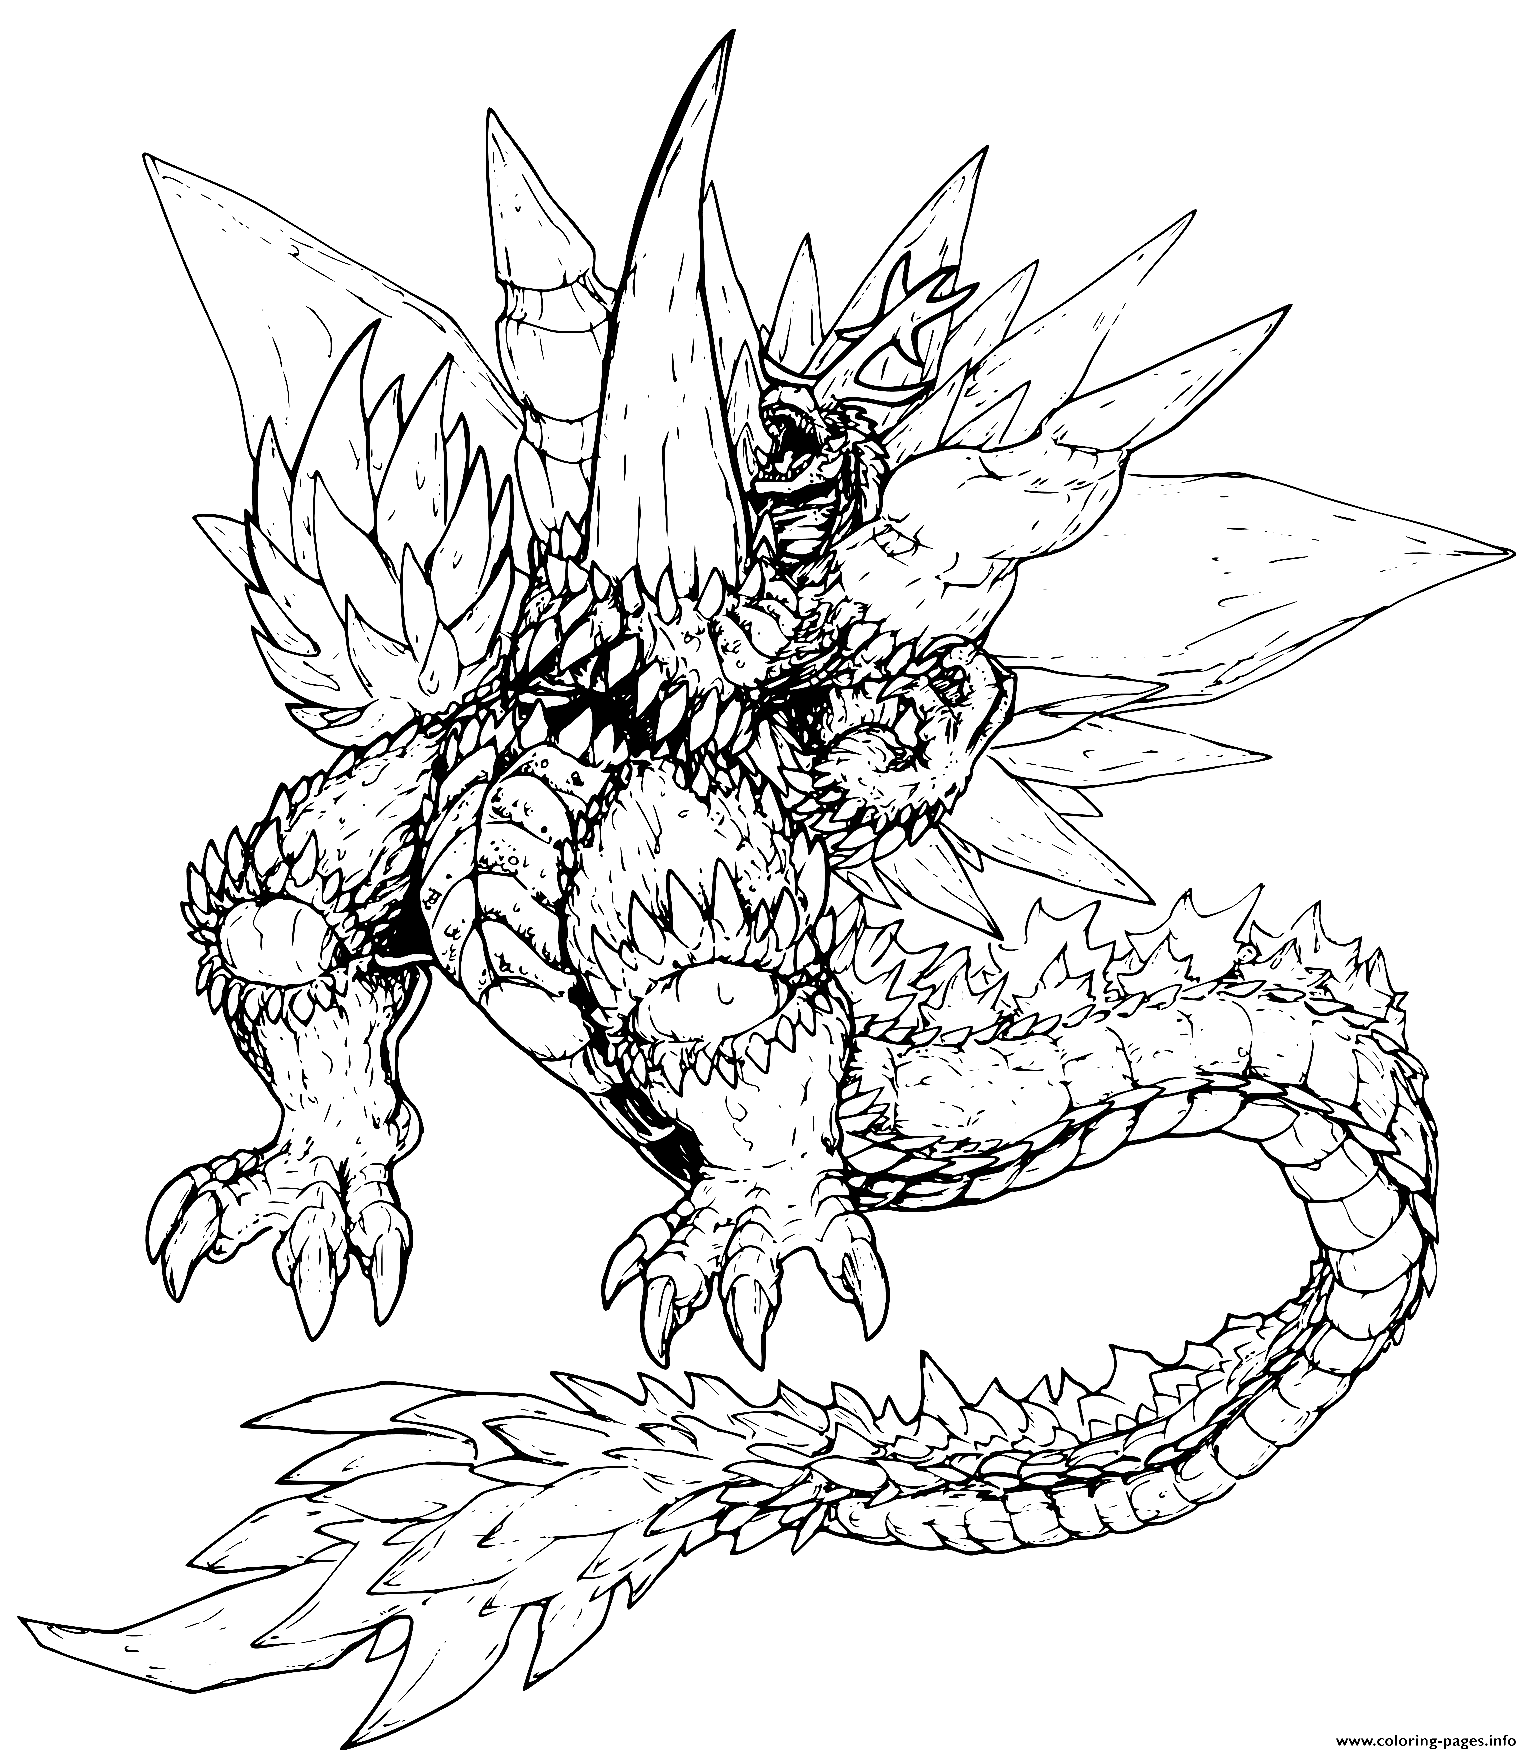 Godzilla coloring pages printable for free download